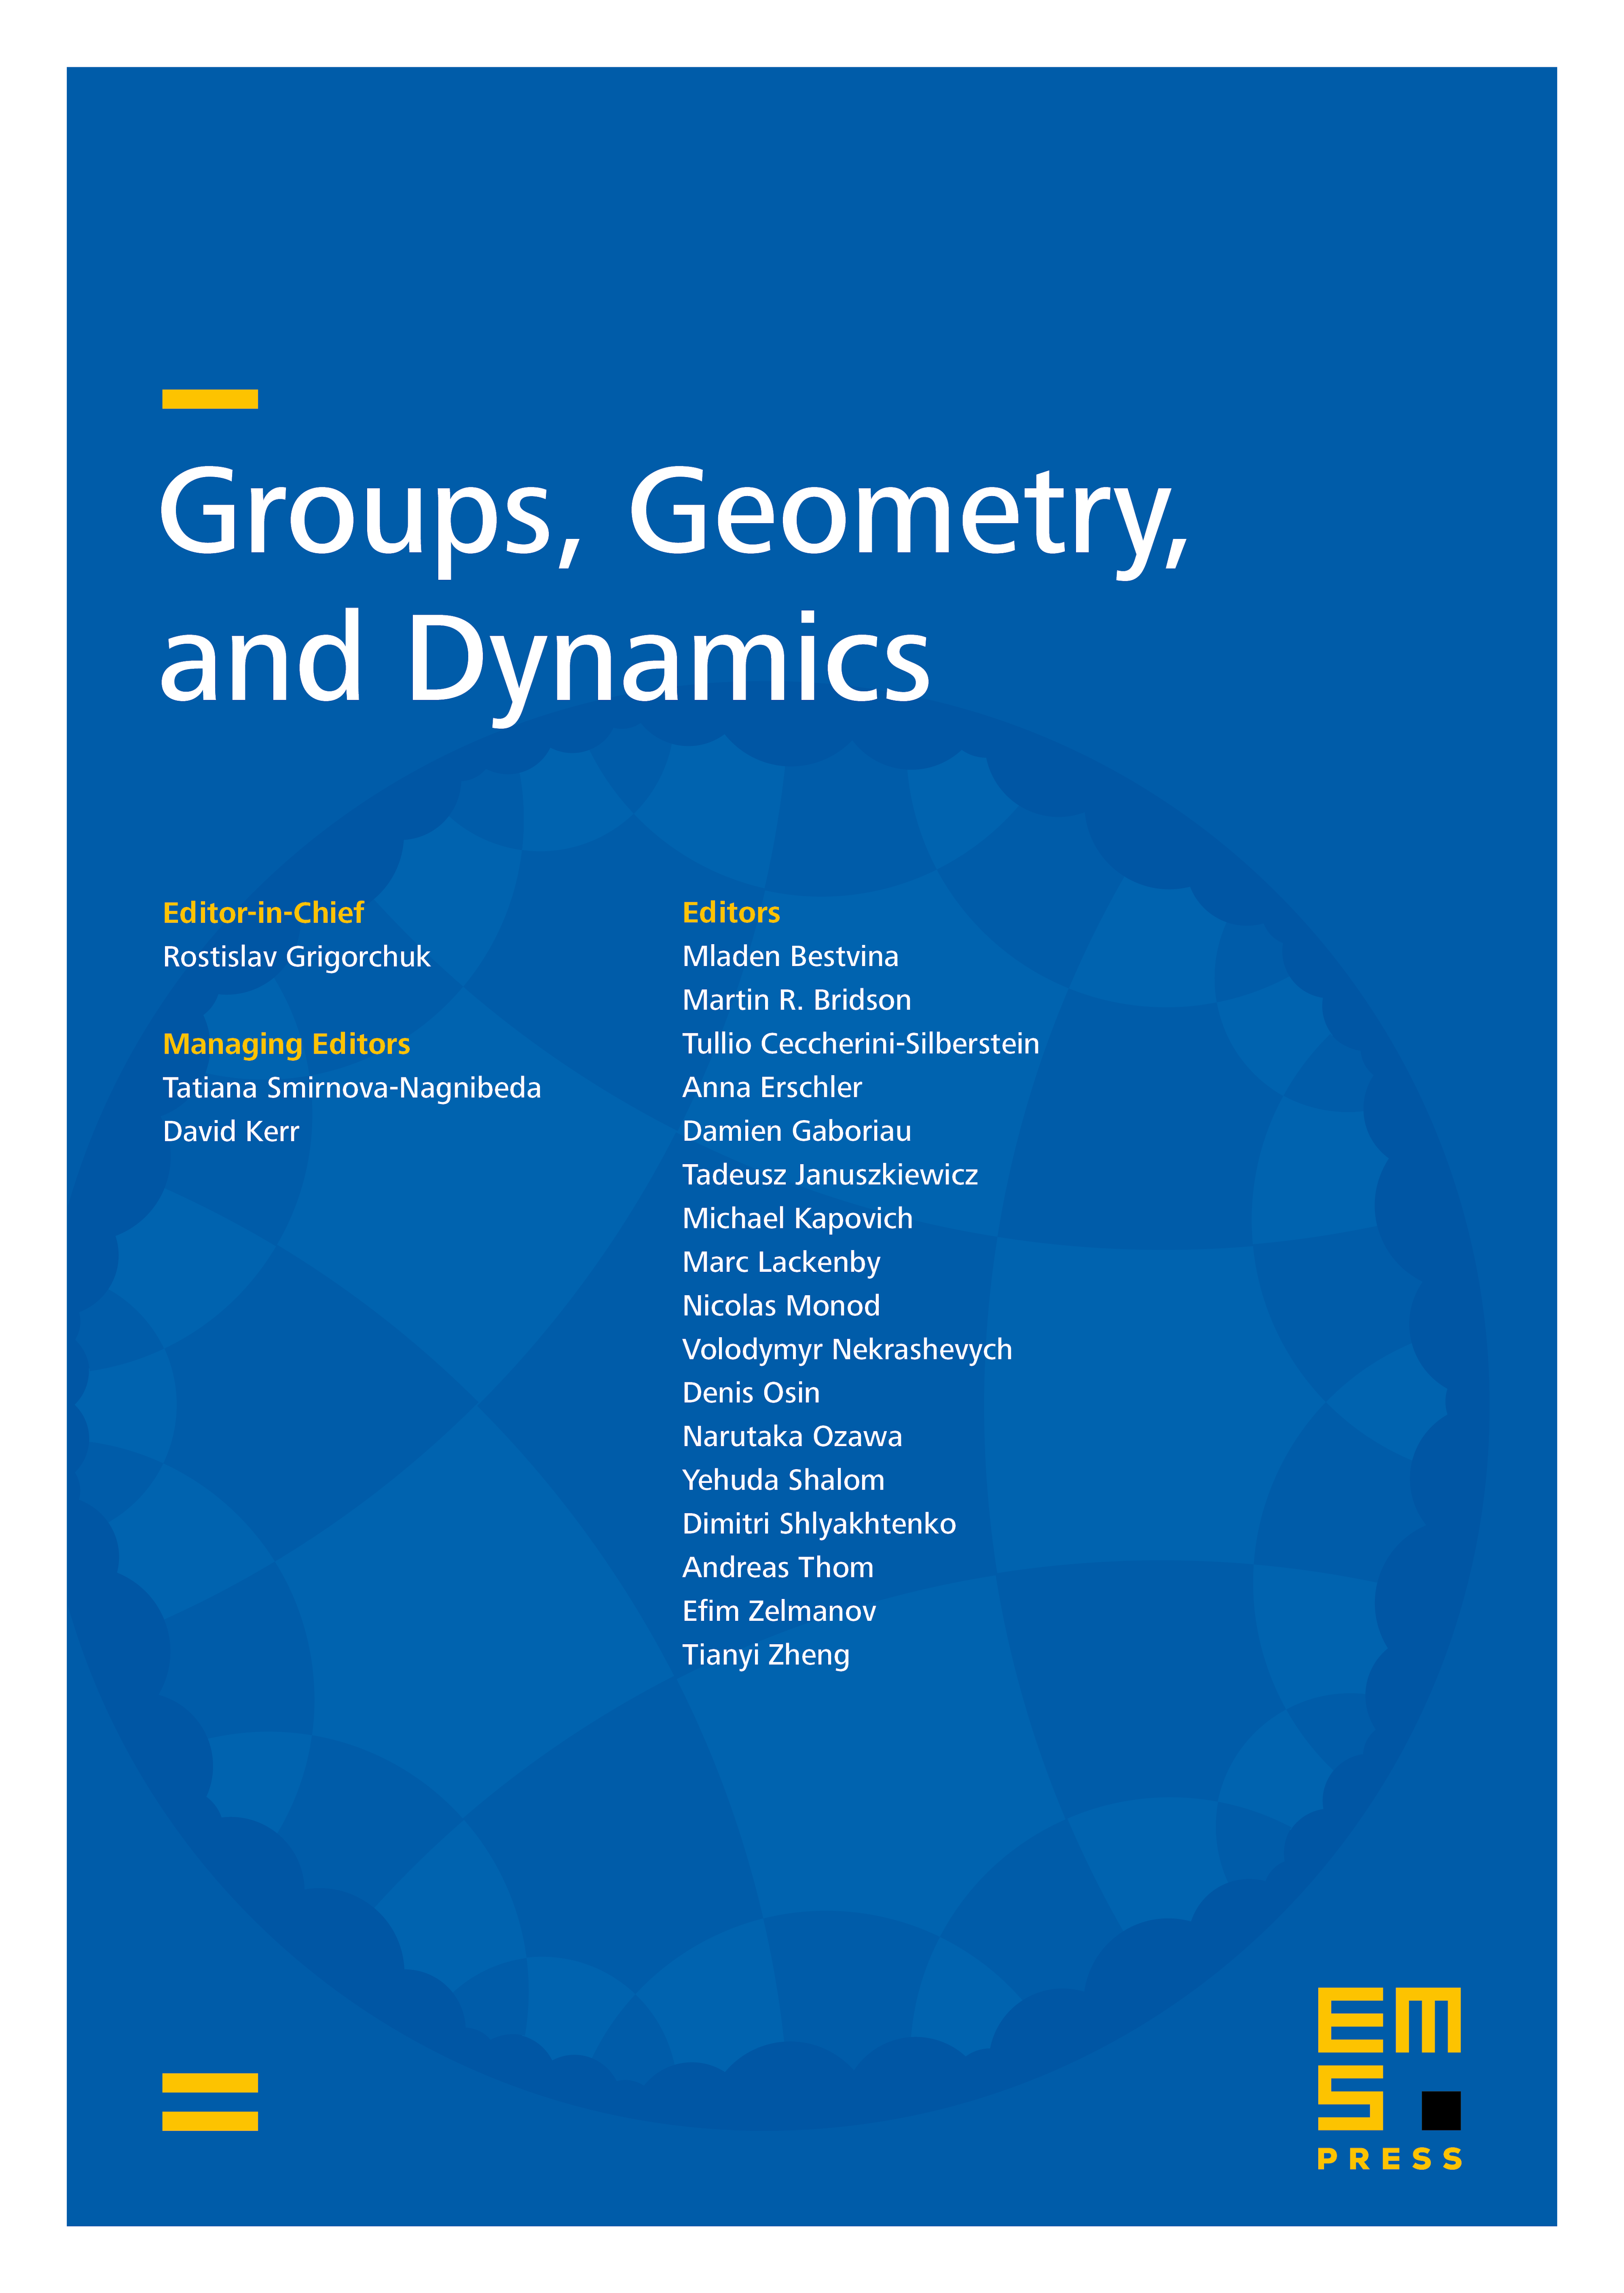 On group-theoretic models of randomness and genericity cover